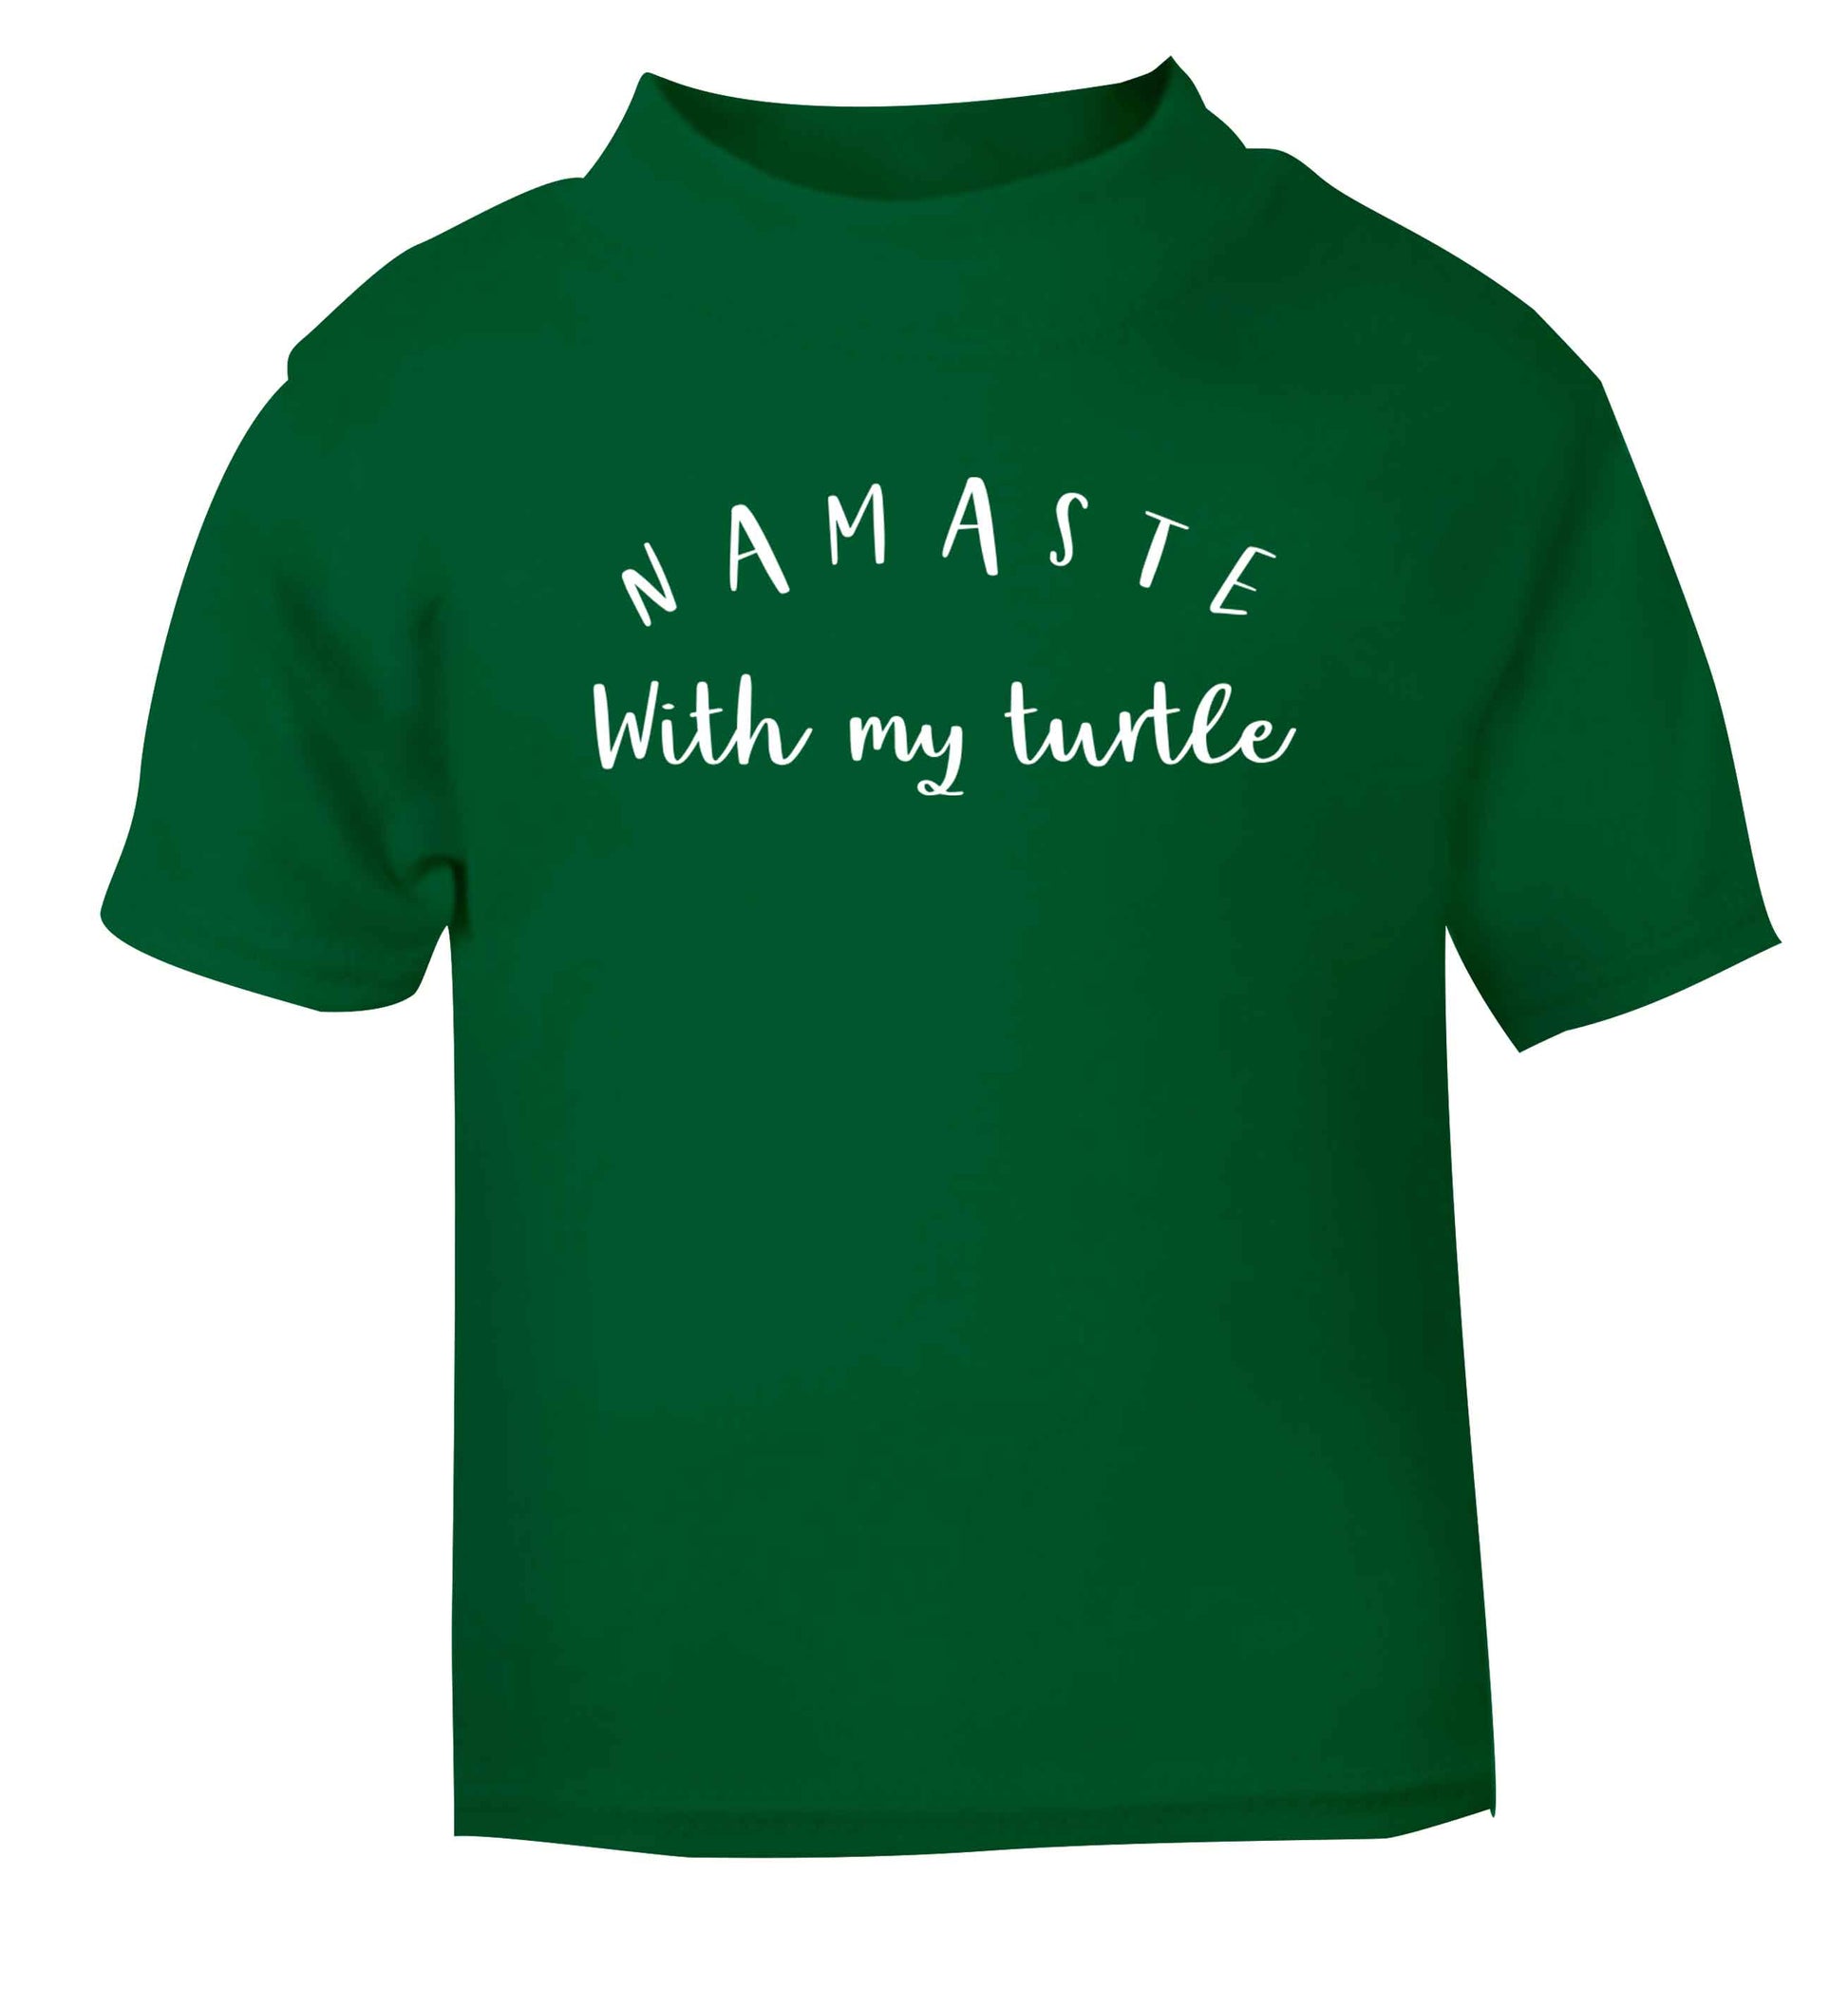 Namaste with my turtle green Baby Toddler Tshirt 2 Years